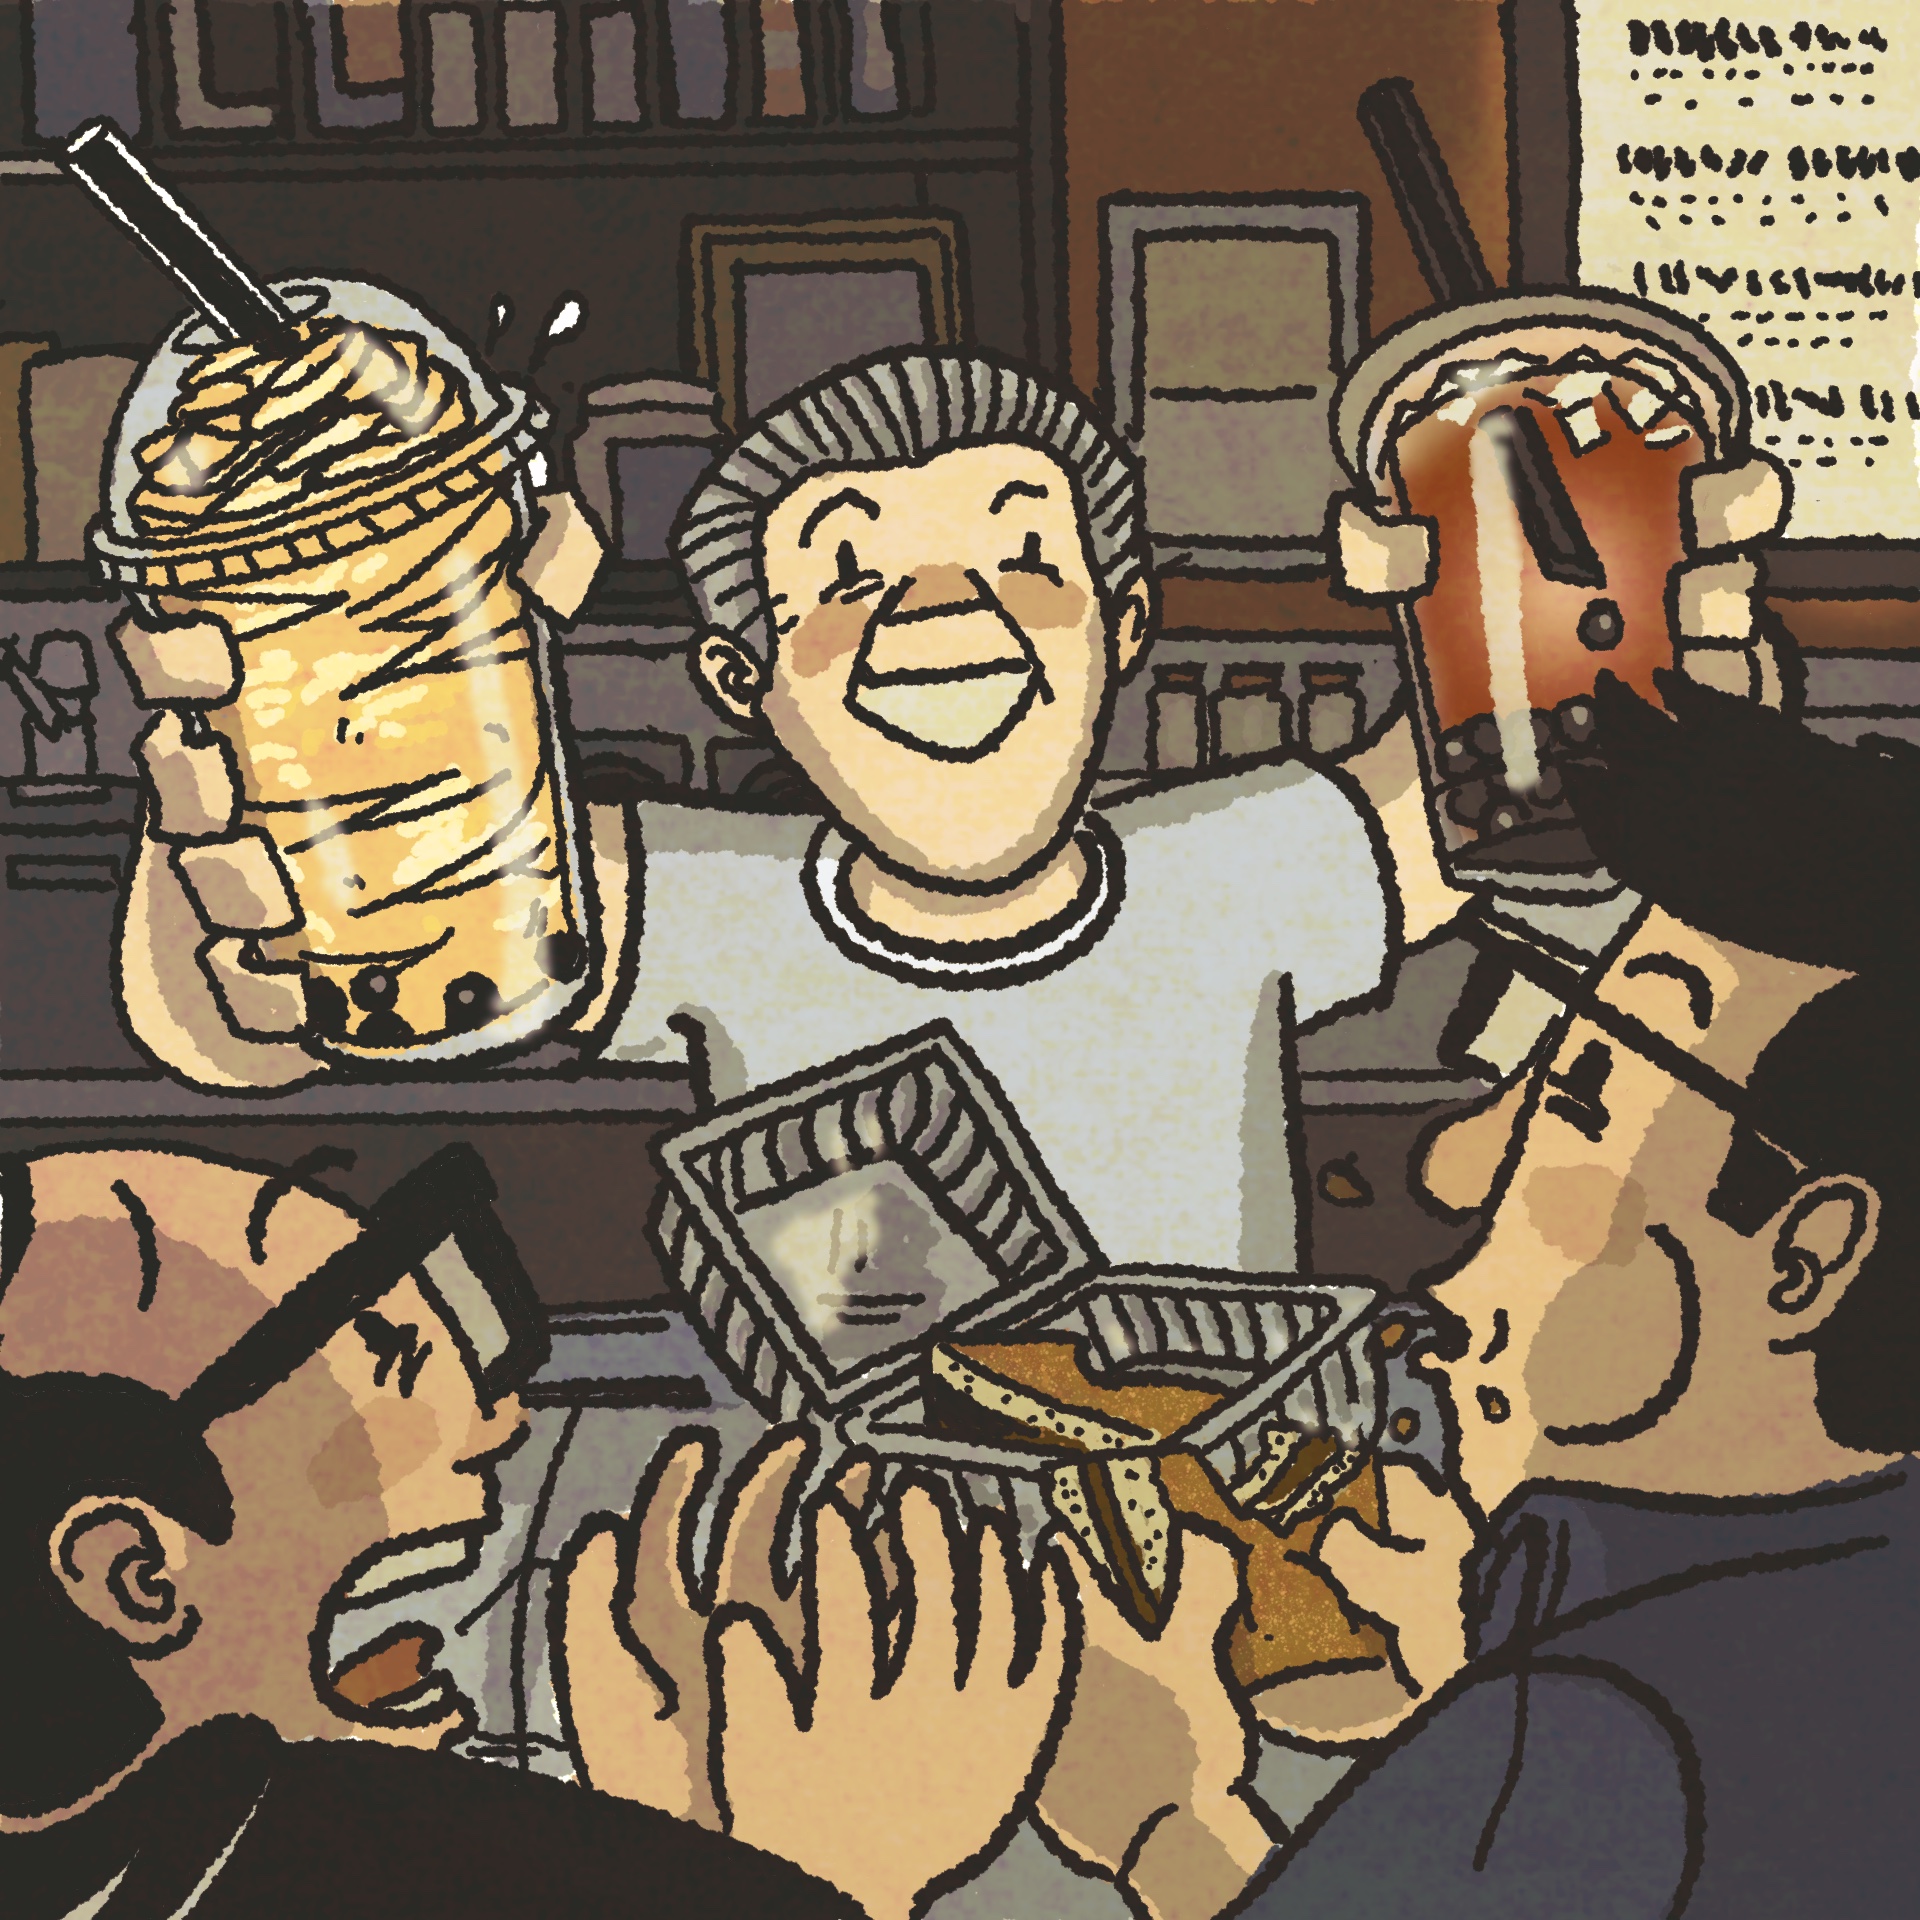 Illustration: A gray-haired man proudly holds up two boba drinks while two customers scarf down a bowl of tiramisu.